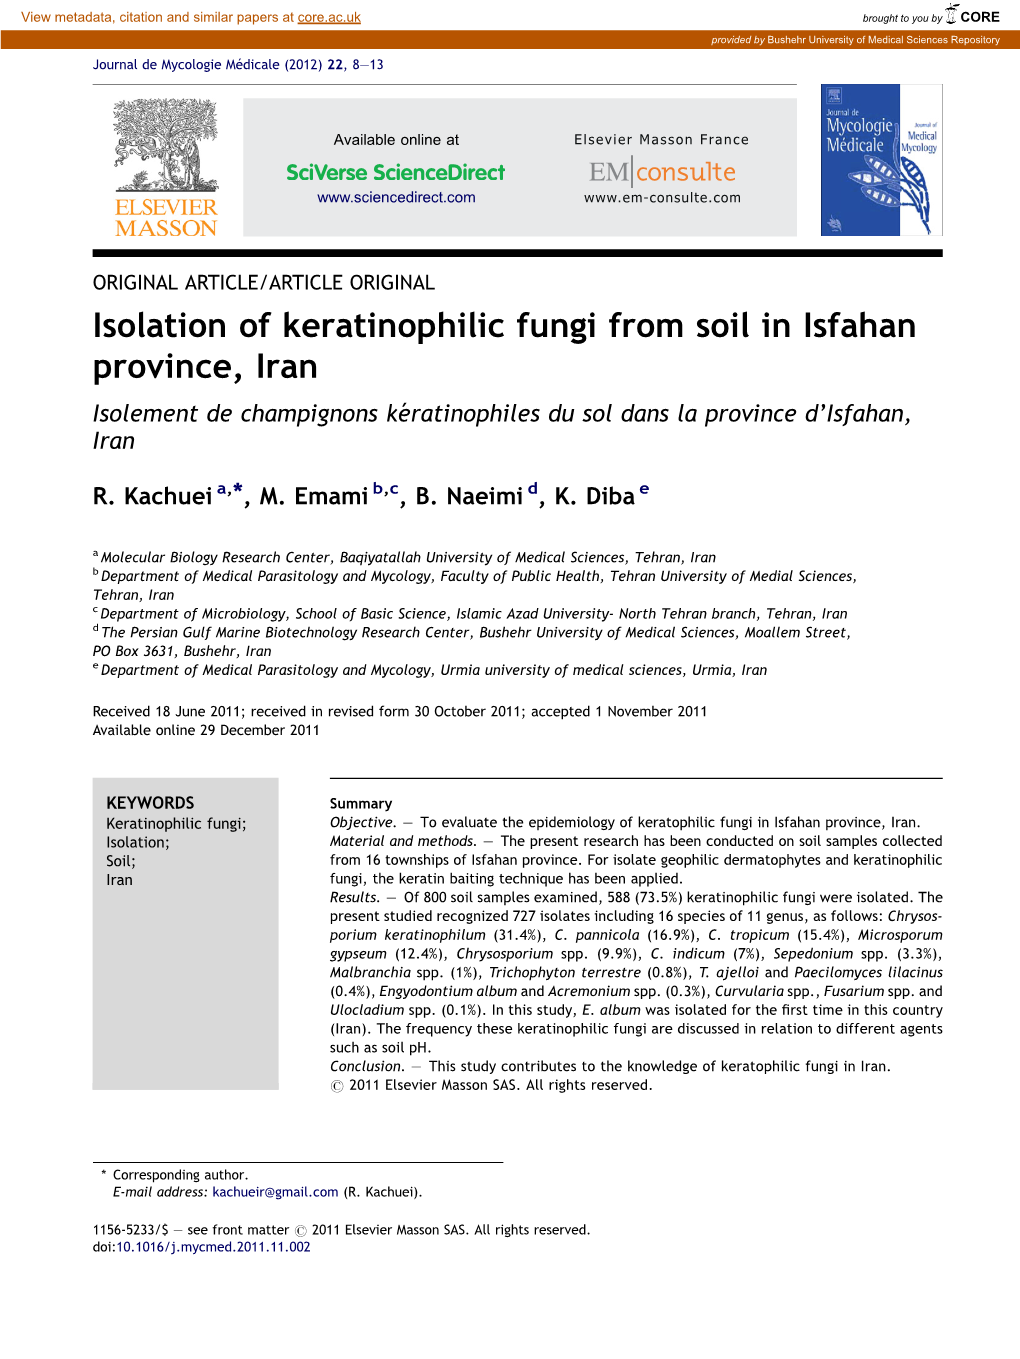 Isolation of Keratinophilic Fungi from Soil in Isfahan Province, Iran Isolement De Champignons Ke´Ratinophiles Du Sol Dans La Province D’Isfahan, Iran